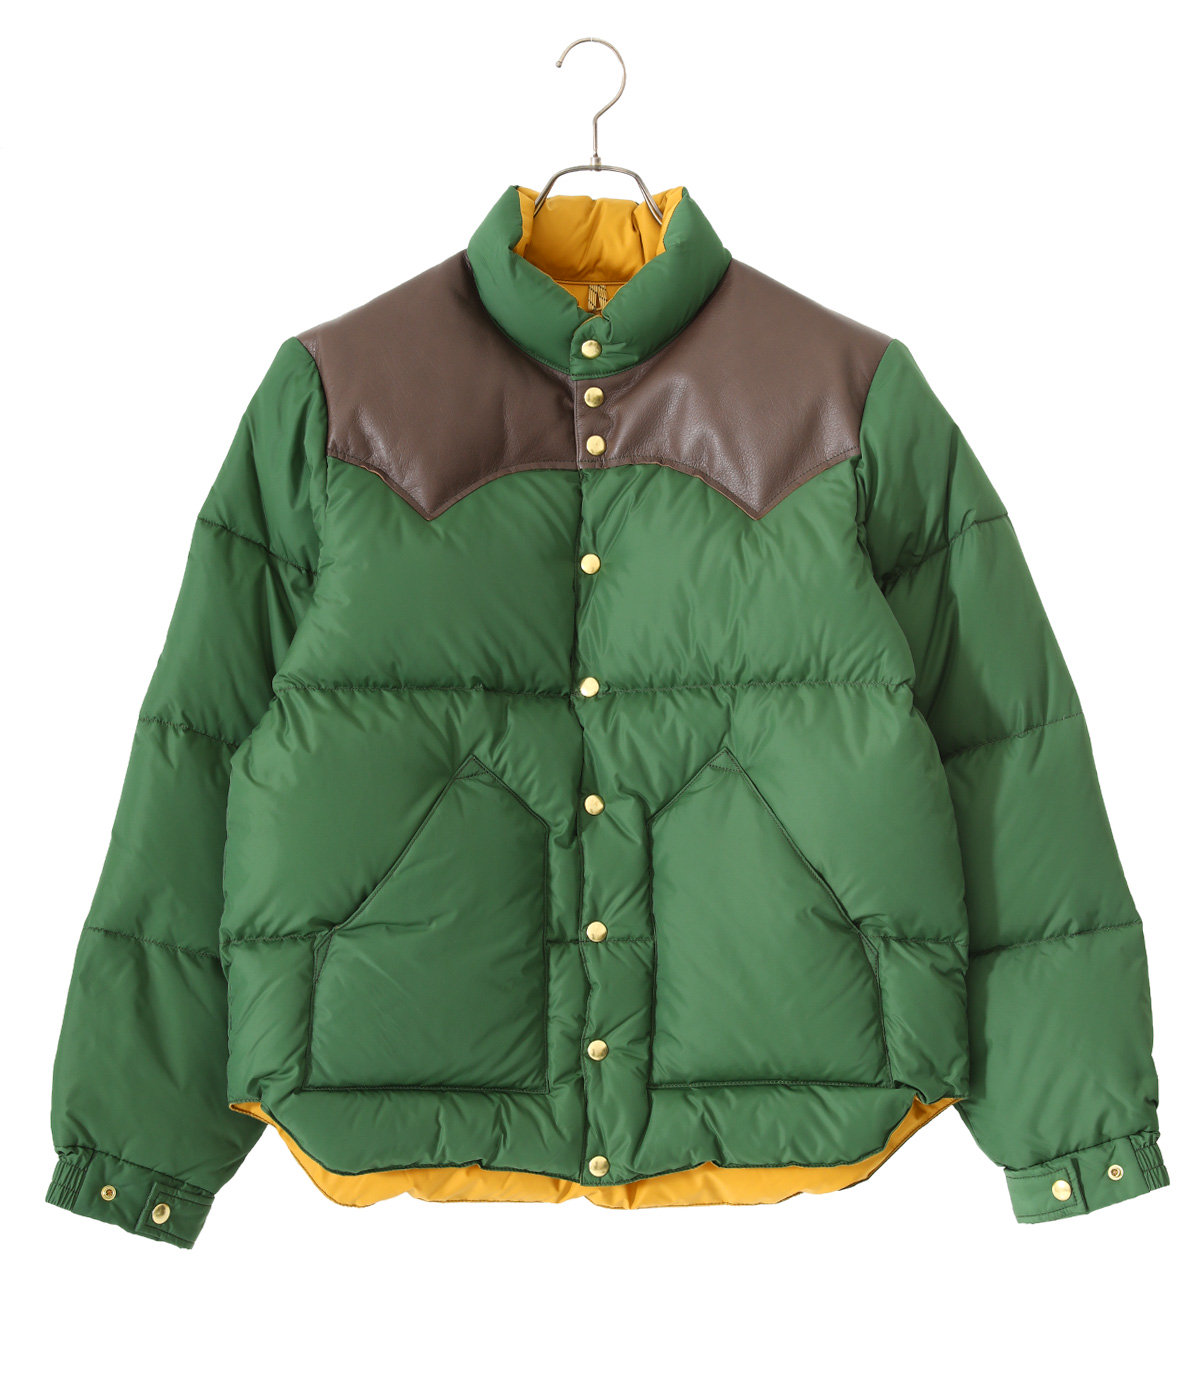 ROCKY MOUNTAIN FEATHER BED / ロッキーマウンテンフェザーベッド ： DOWN JACKET LIMITED EDITION  ： 290-222-50